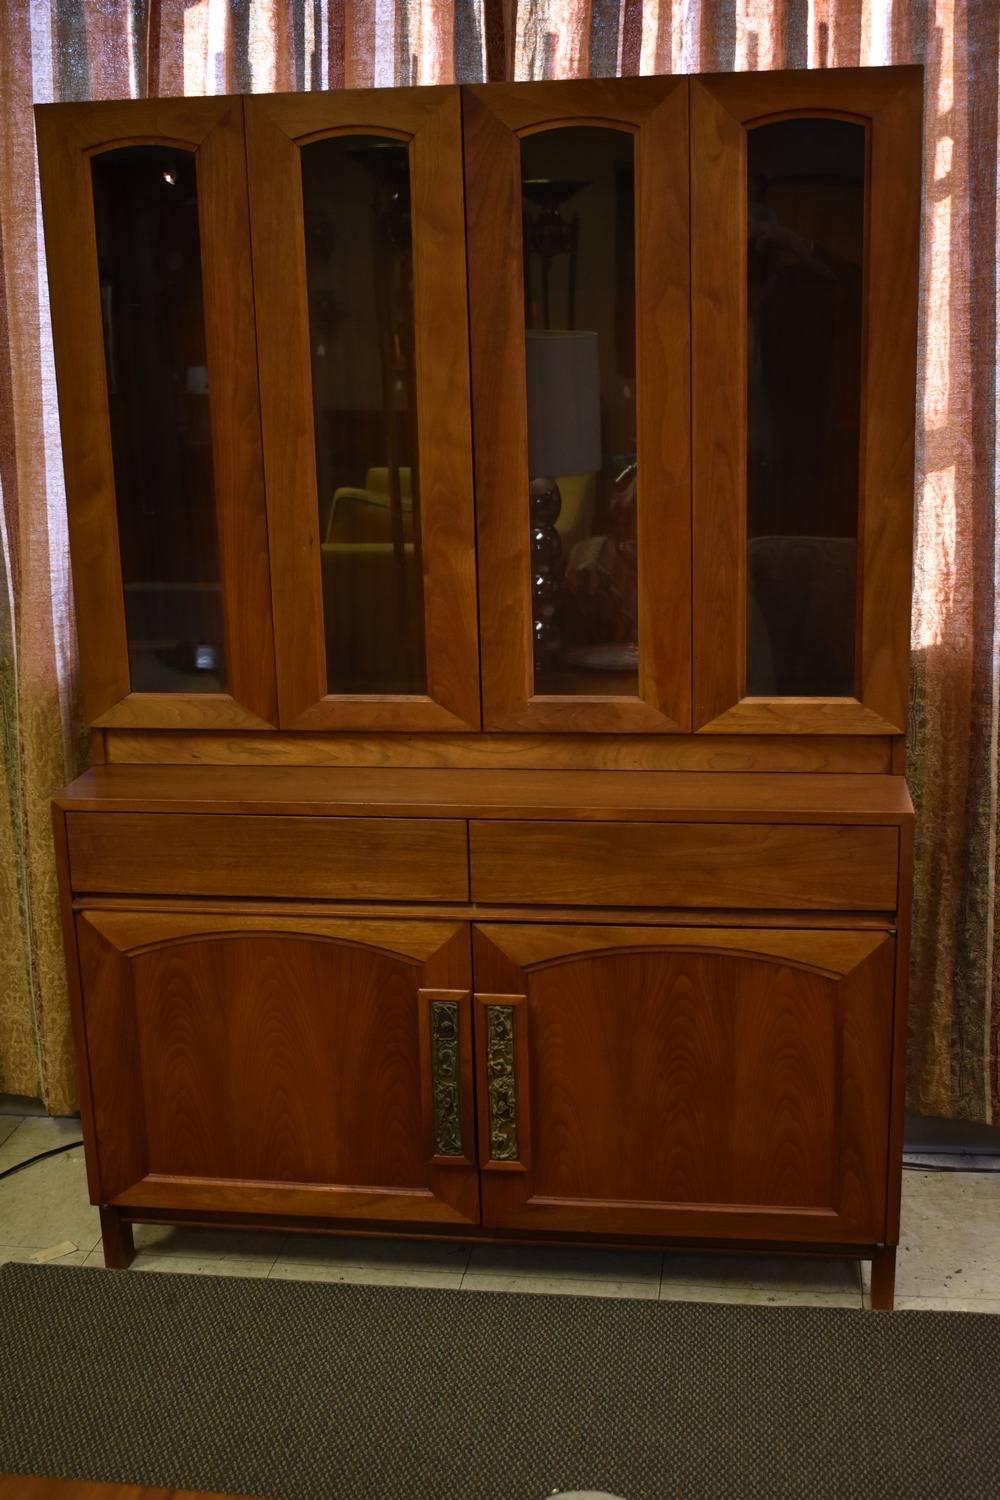 A great teak two-piece China cabinet designed by John Keal for Brown Saltman. The top piece has two bifold doors; each opens to a display area with two adjustable shelves. The top piece is 38